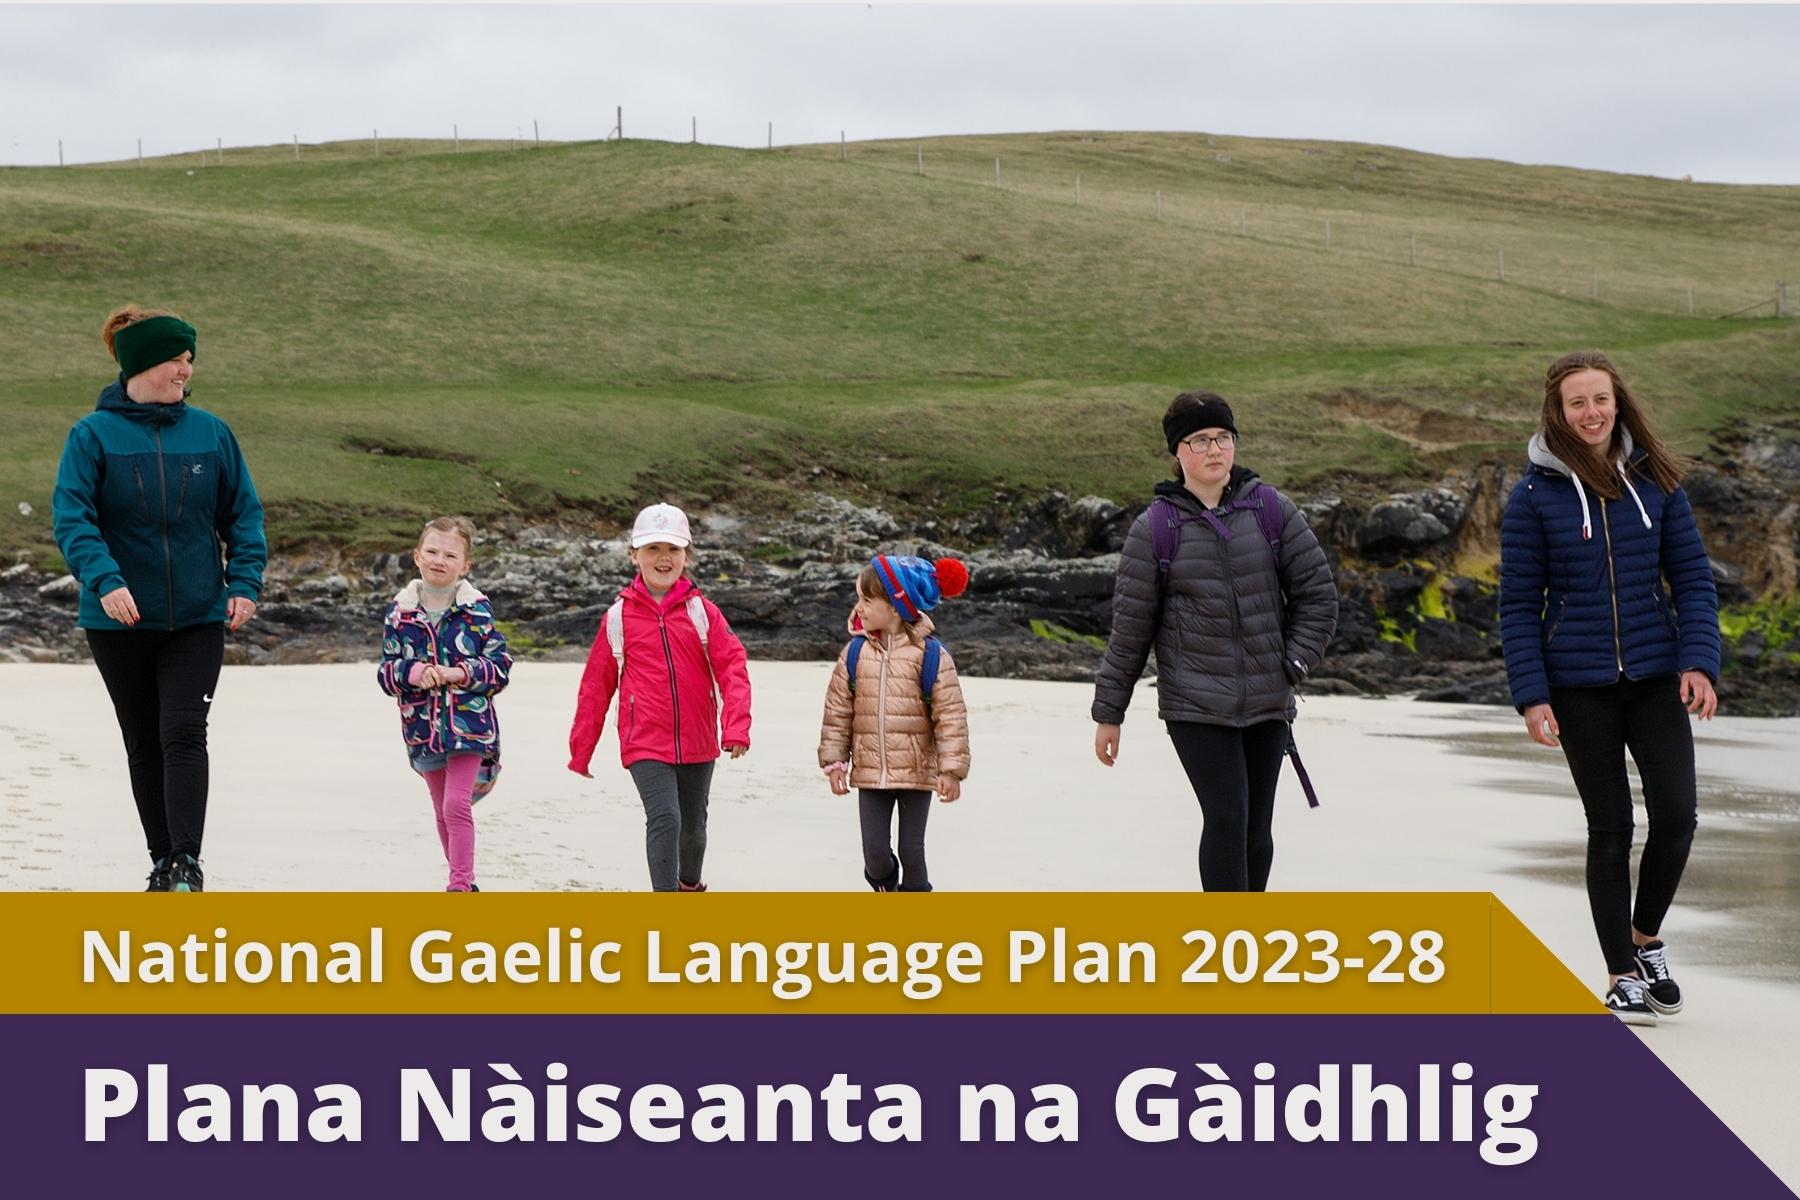 Picture: Group of 6 people, 3 of which are young children, walking along the beach with text over picture. Text reads 'National Gaelic Language Plan 2023-28'